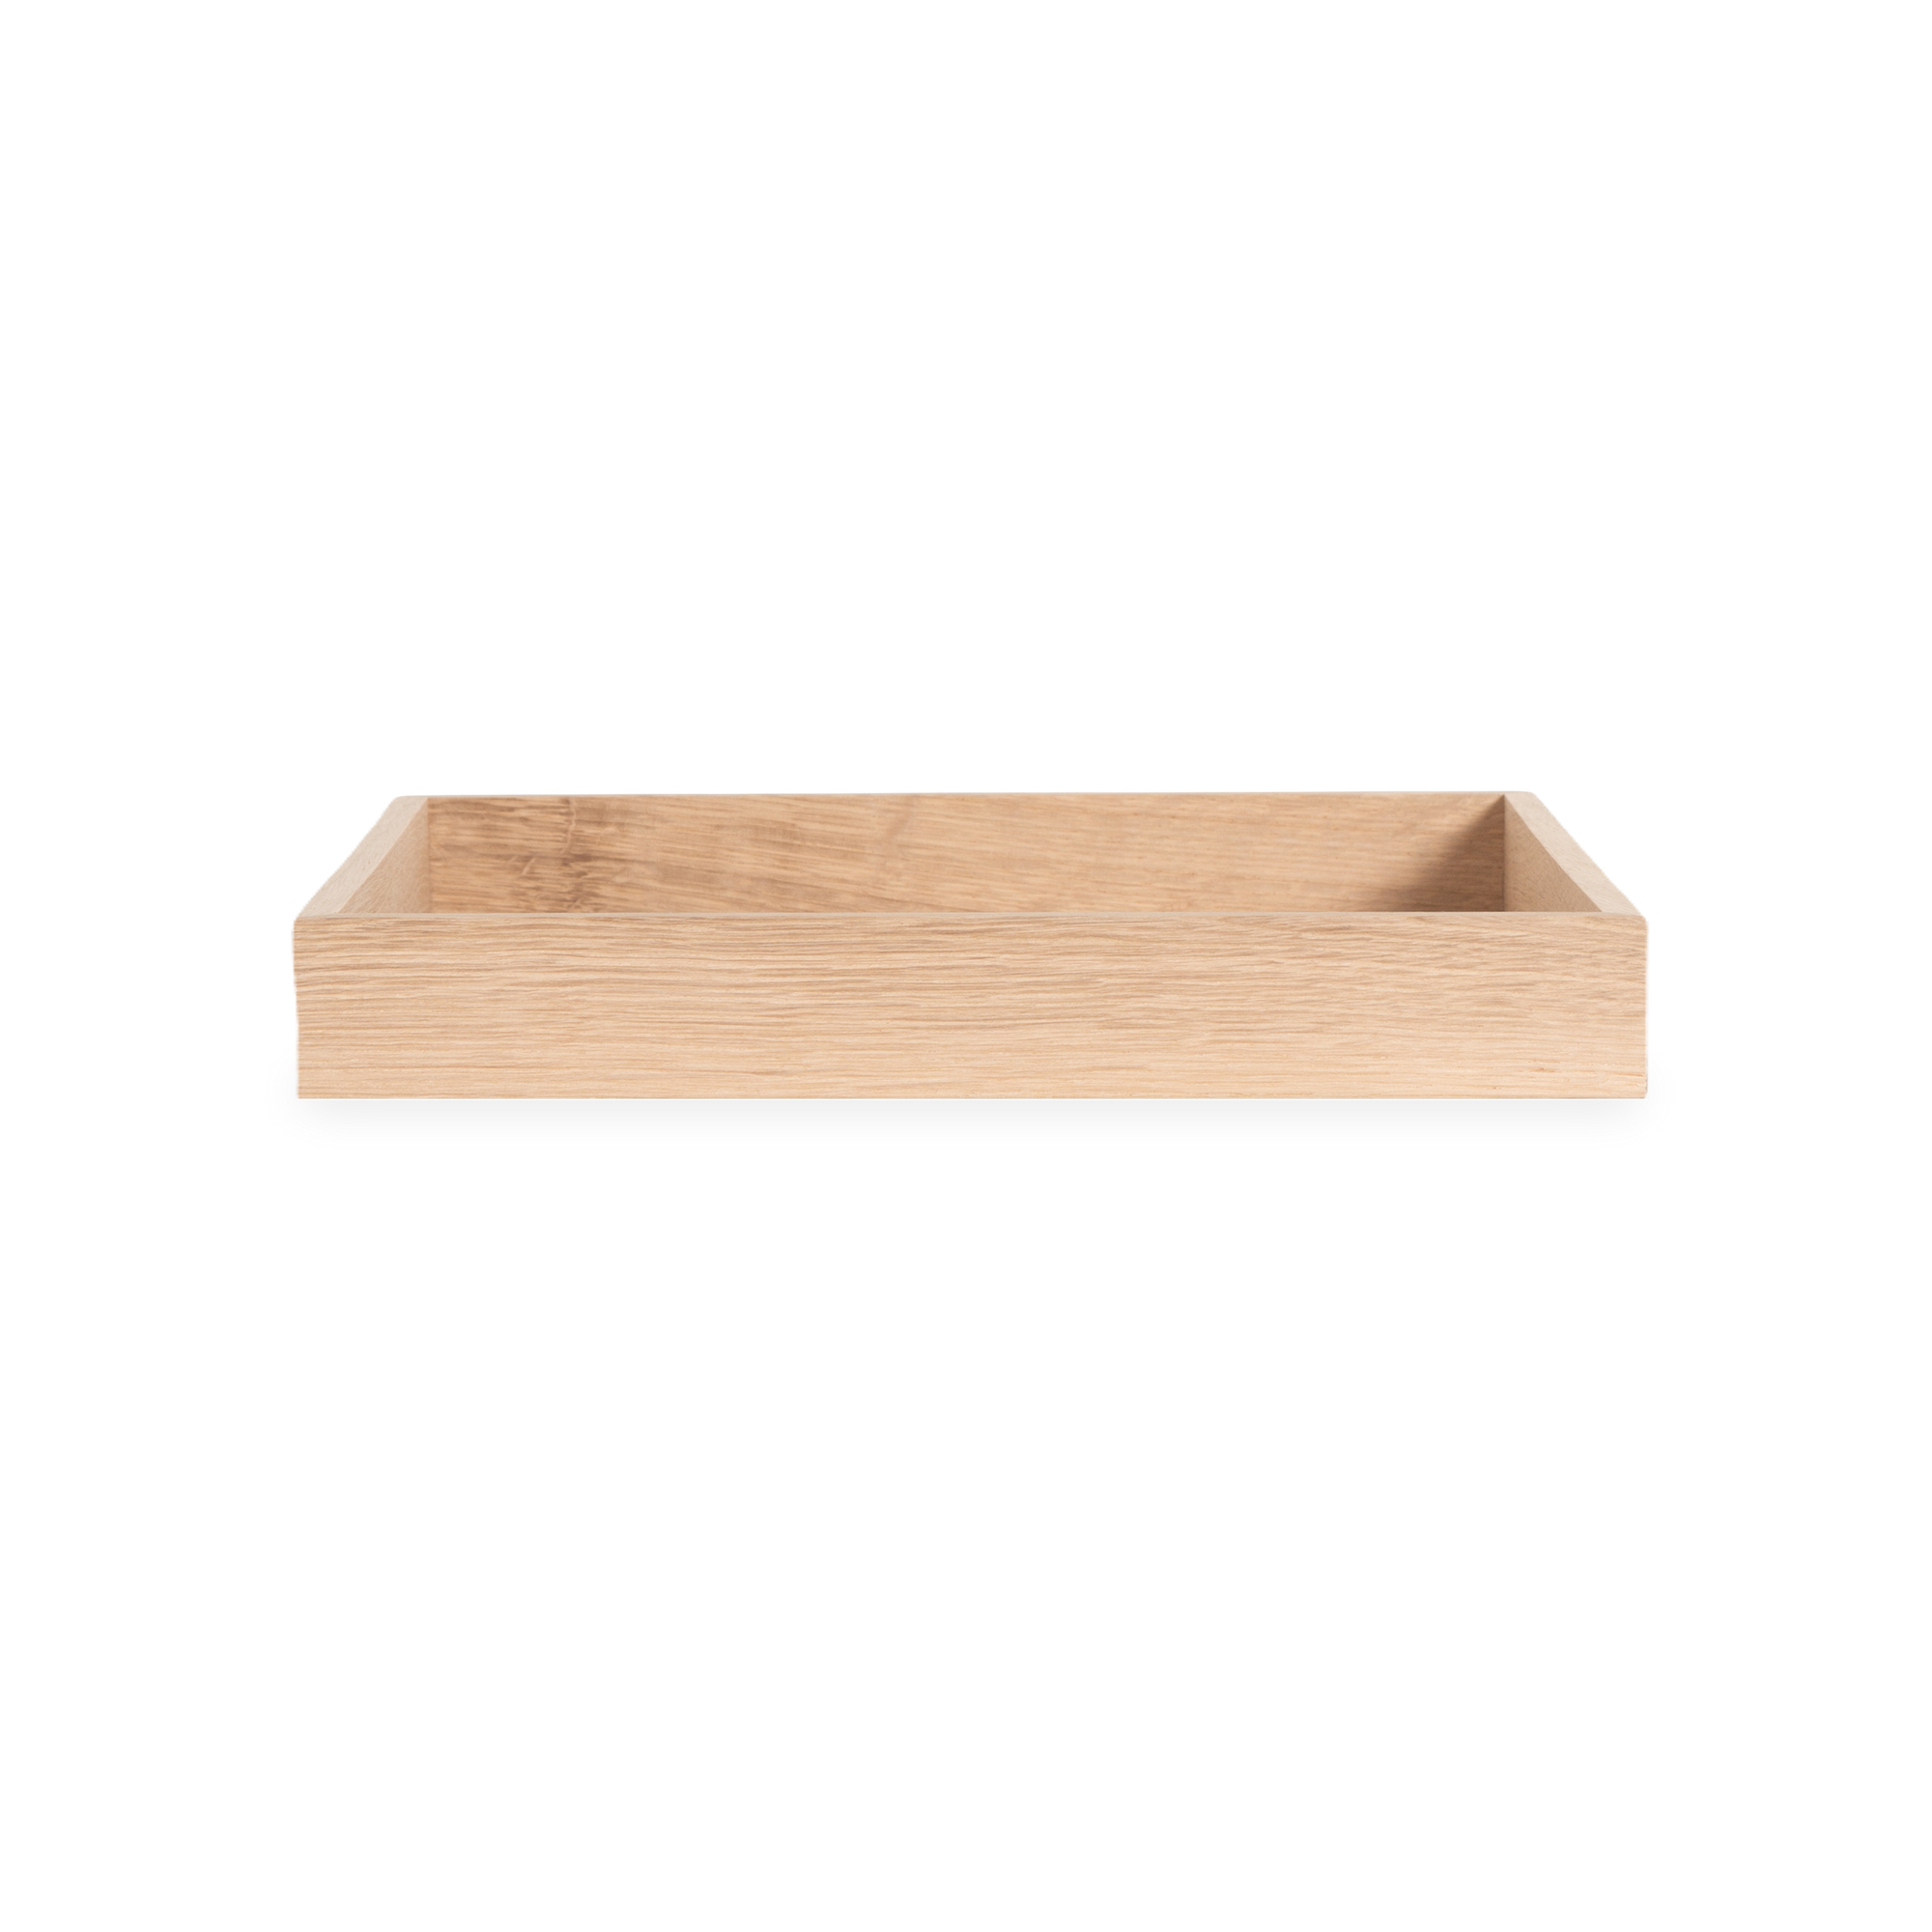 Created with a focus on elegance through simplicity, the Oak Tray was carefully crafted using high-quality oak wood from the Black Forest in Germany.